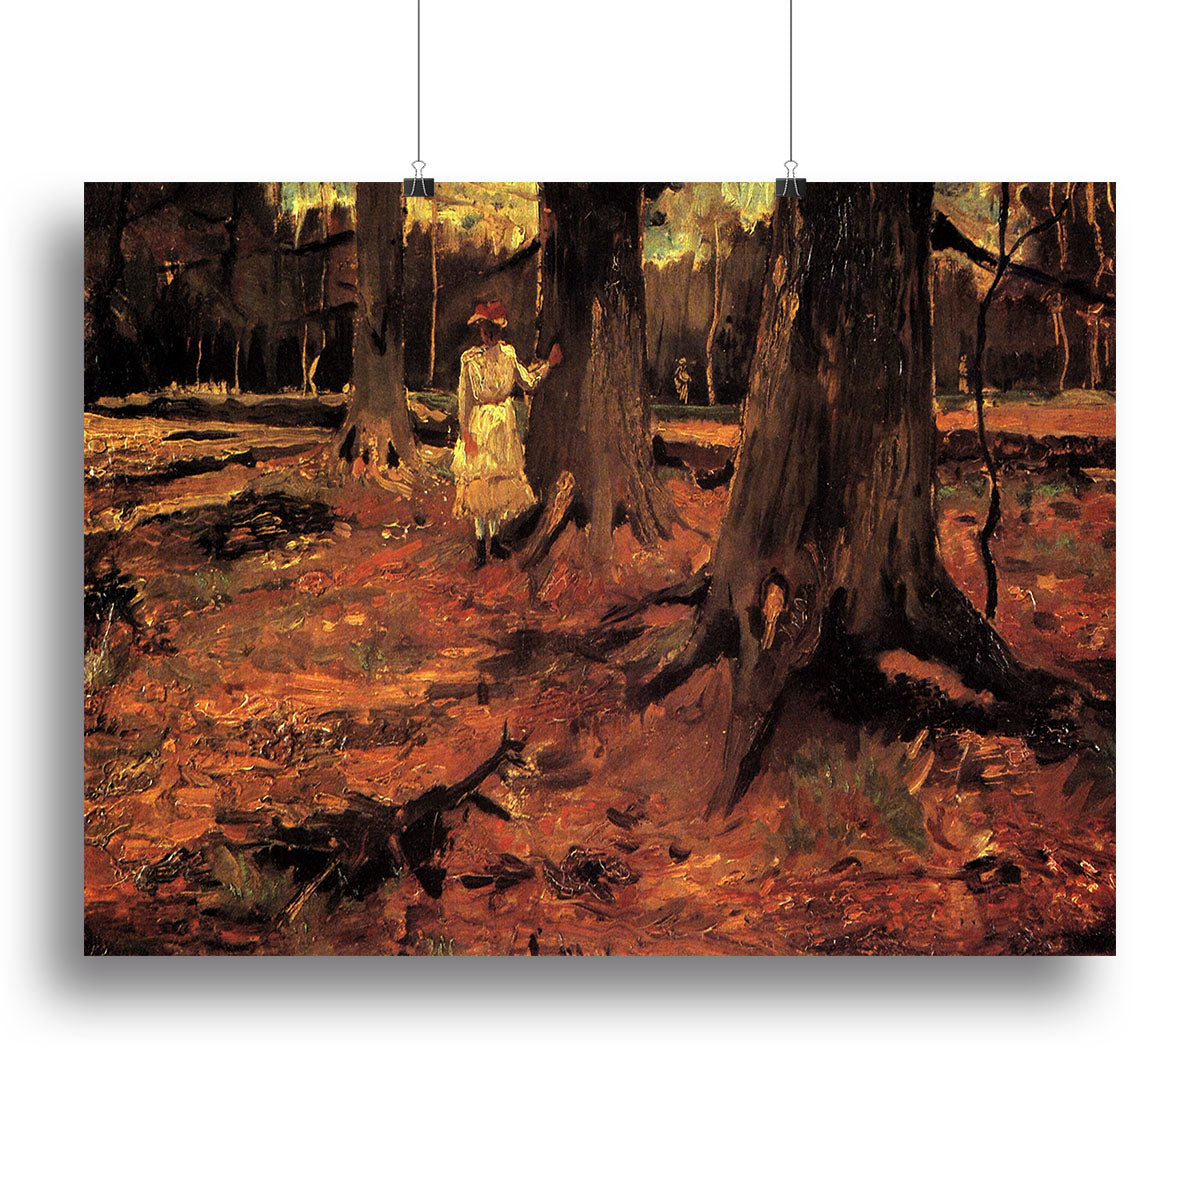 Girl in White in the Woods by Van Gogh Canvas Print or Poster - Canvas Art Rocks - 2